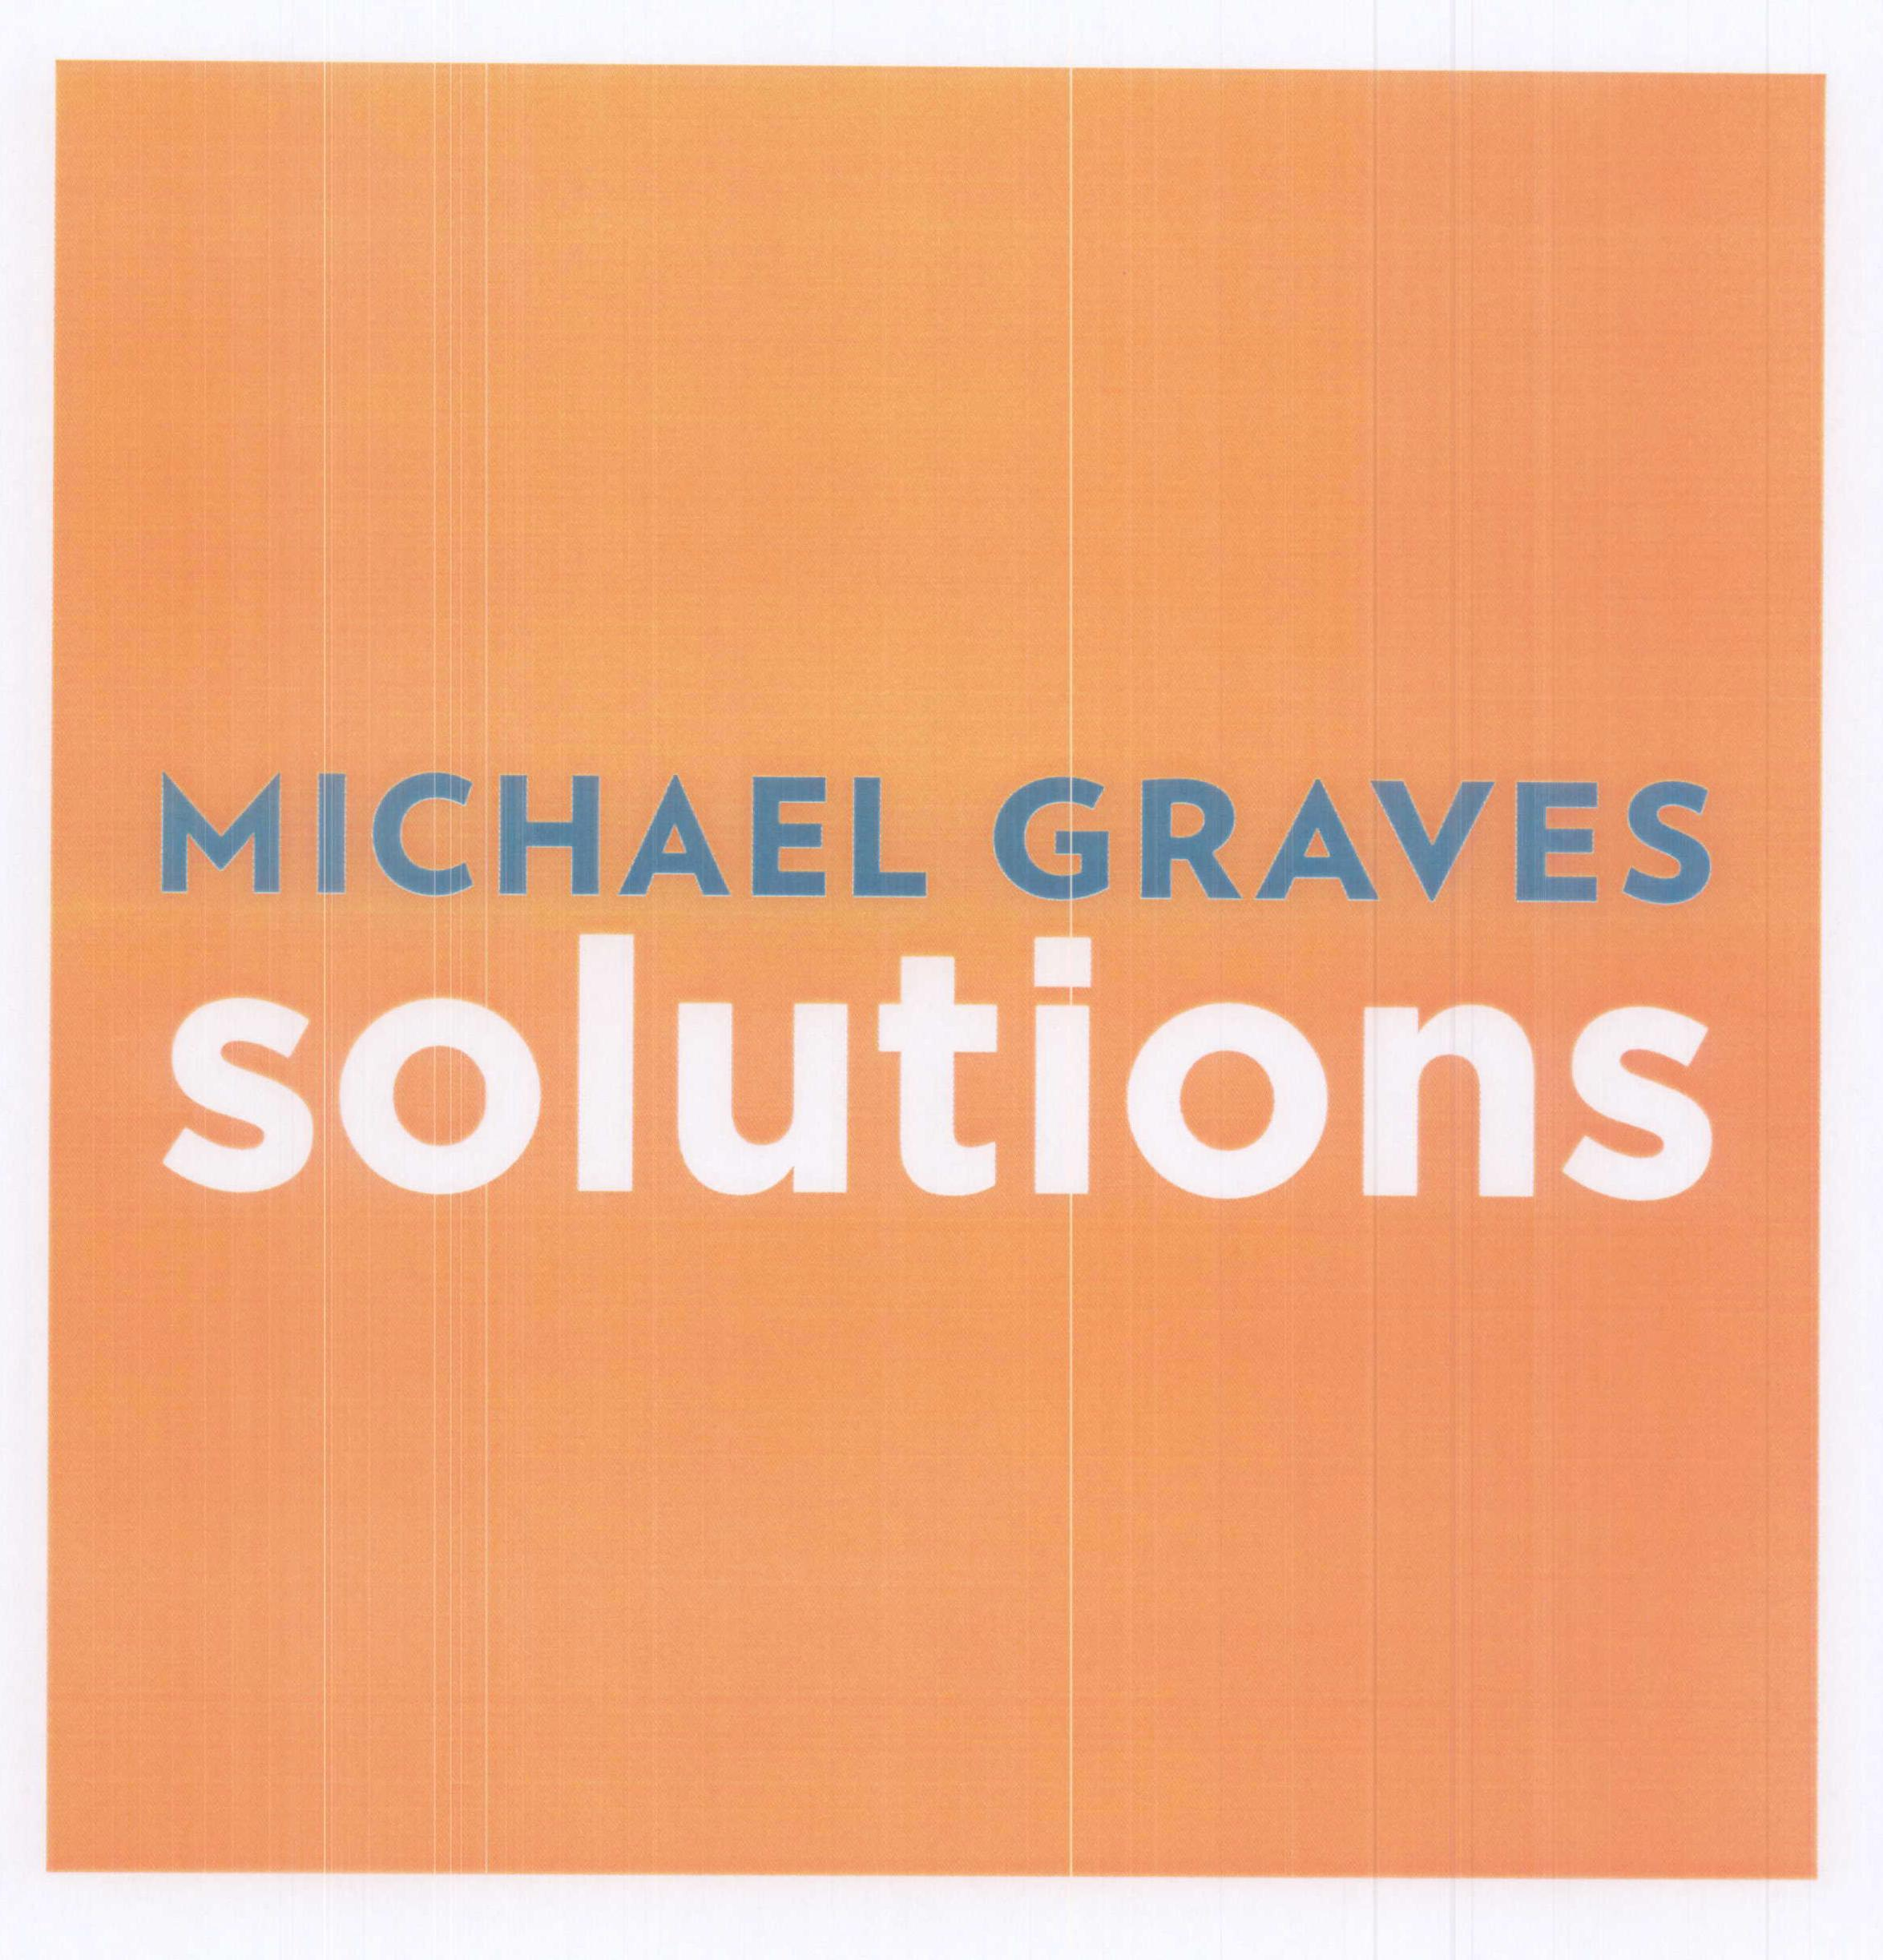  MICHAEL GRAVES SOLUTIONS